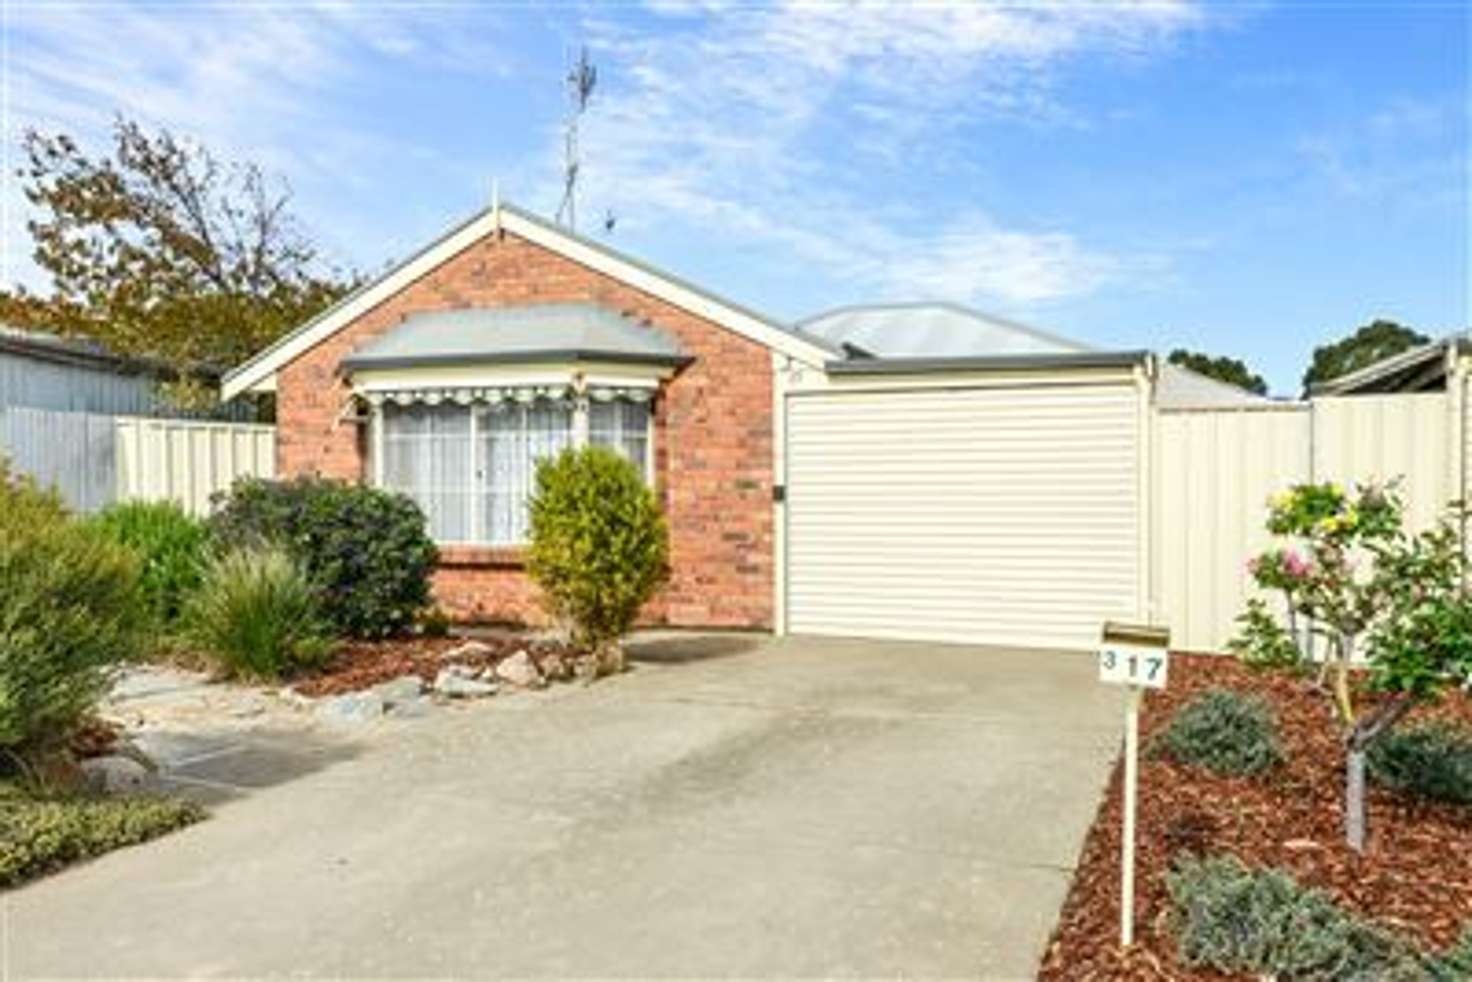 Main view of Homely unit listing, 3/17 William Street, Goolwa SA 5214